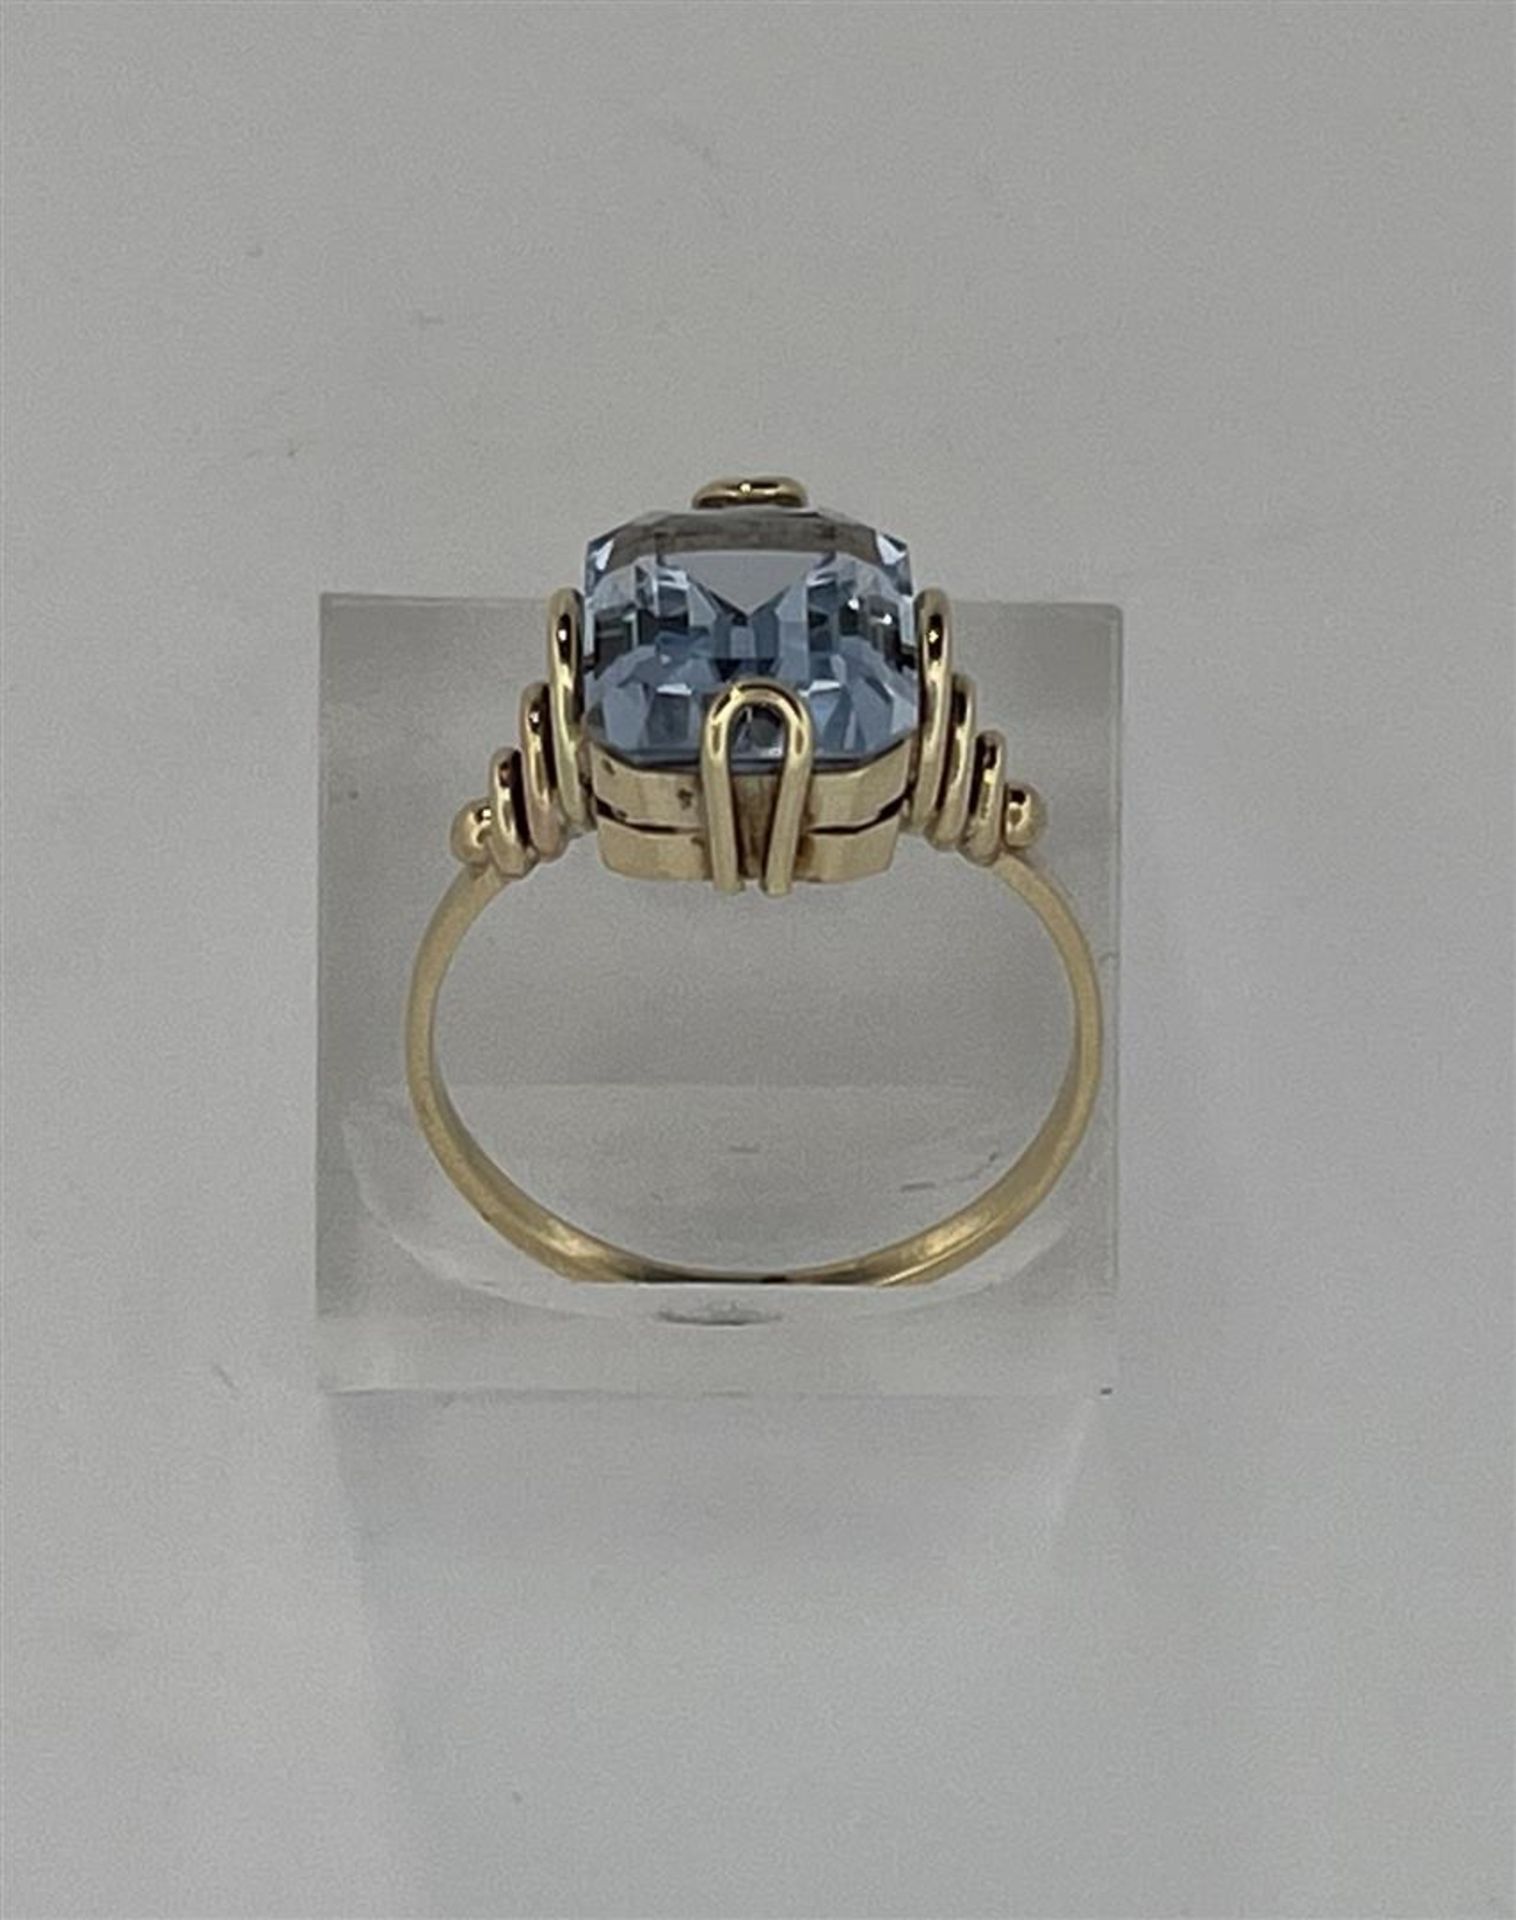 14kt yellow gold ring set with aquamarine.
The aquamarine isemerald cut measures approx. 11.8 x 8.9  - Image 6 of 11